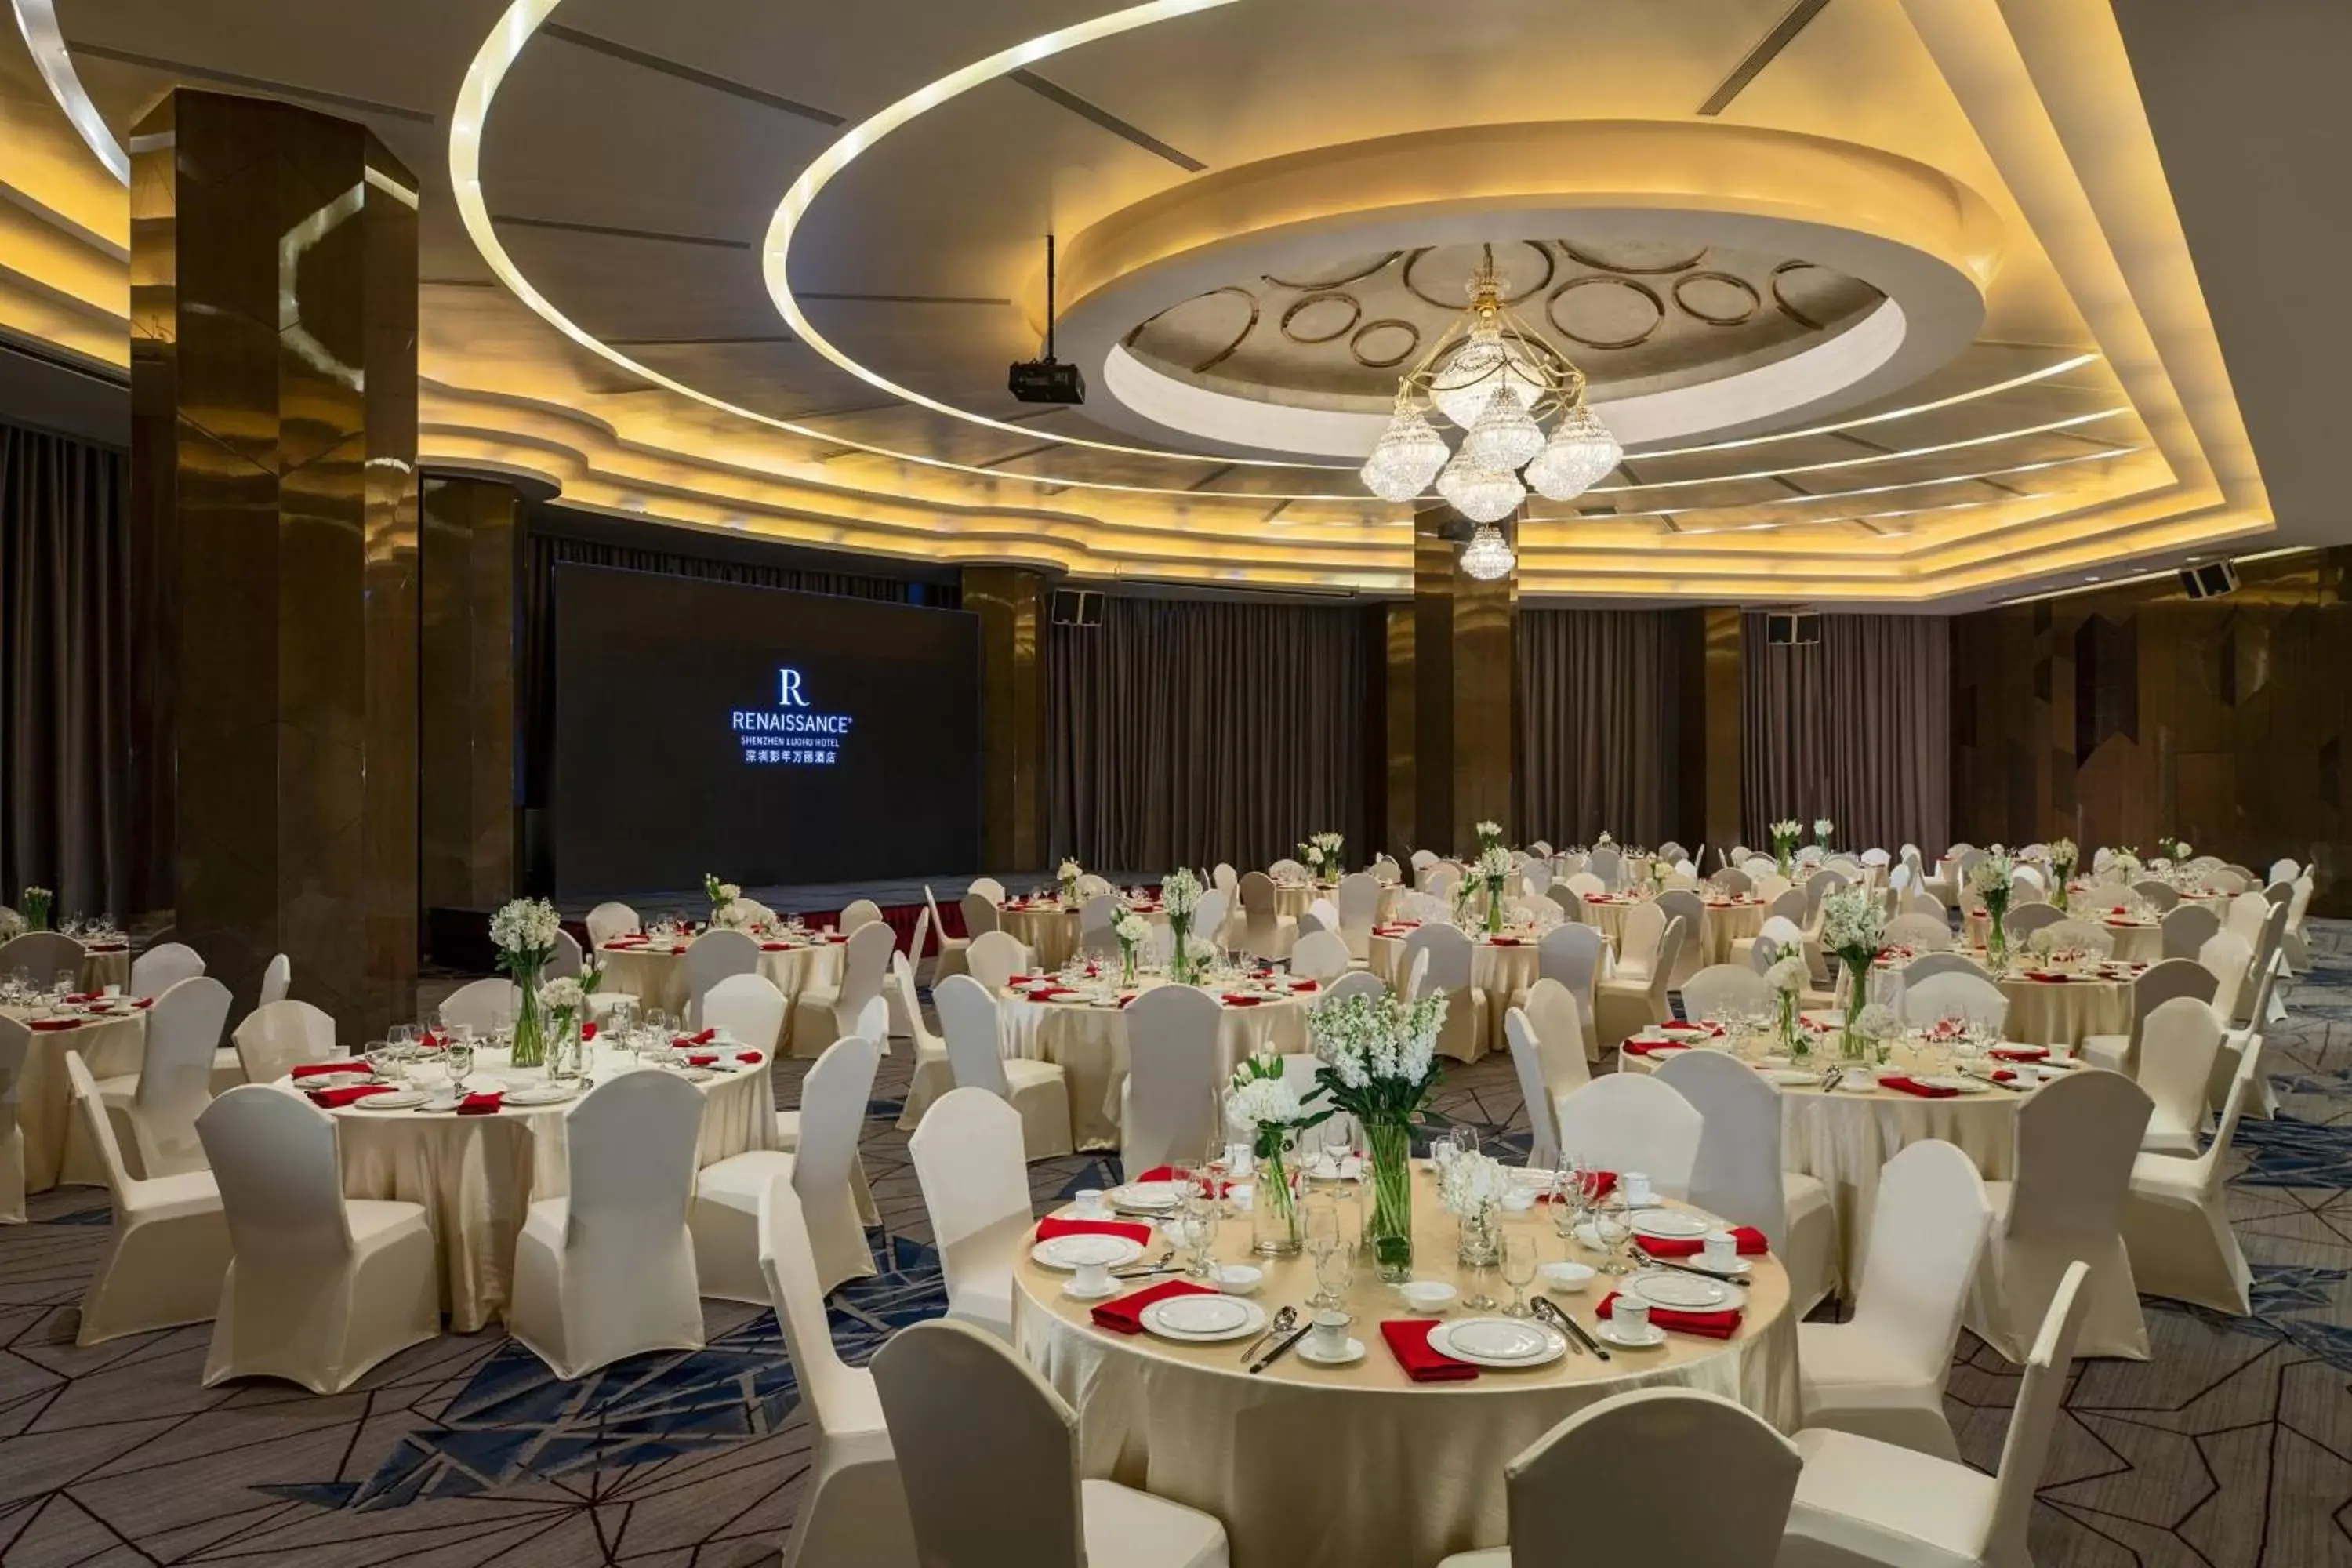 Meeting/conference room, Banquet Facilities in Renaissance Shenzhen Luohu Hotel